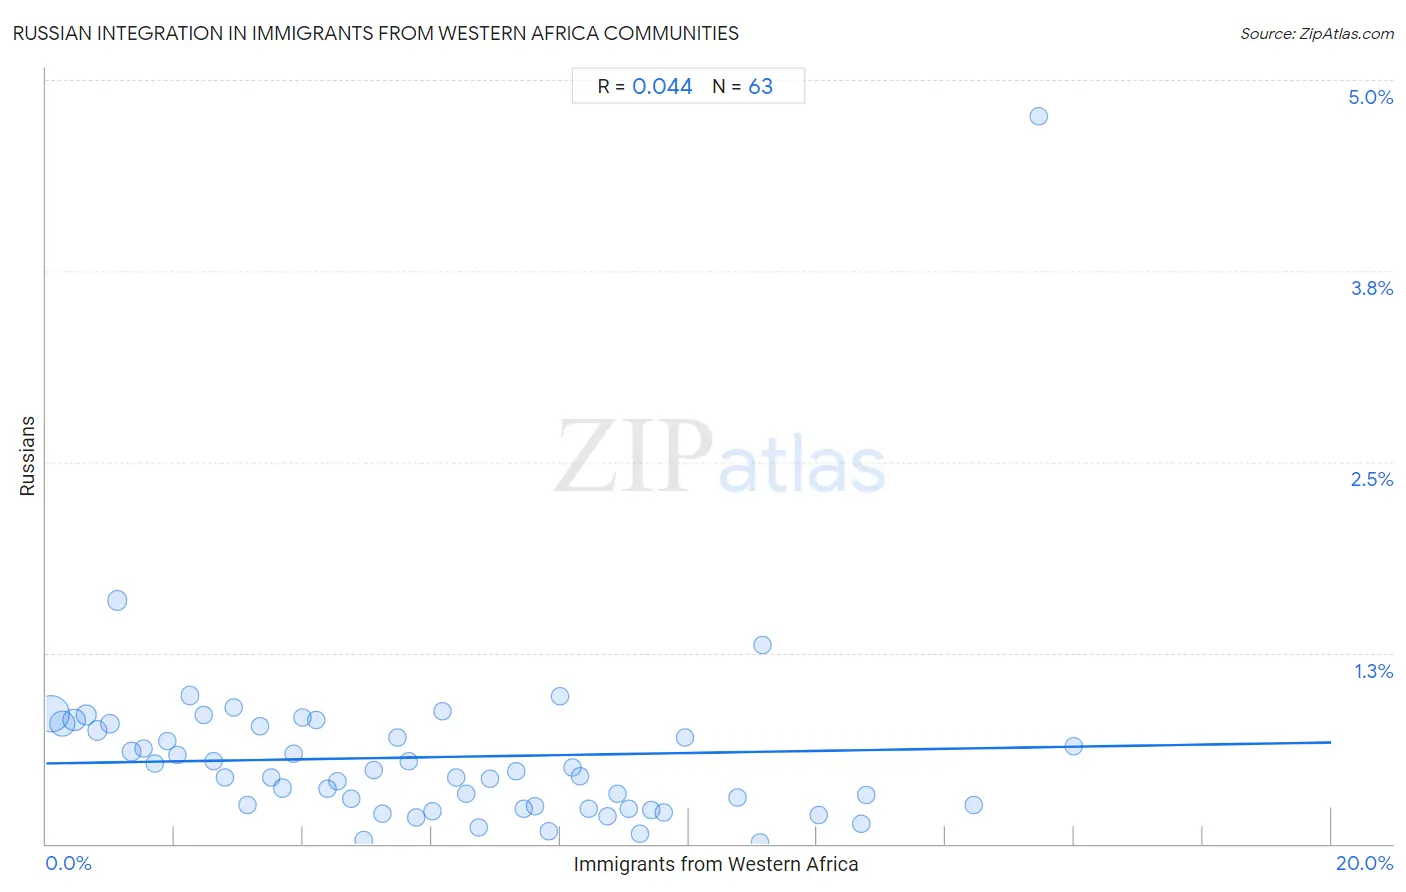 Immigrants from Western Africa Integration in Russian Communities